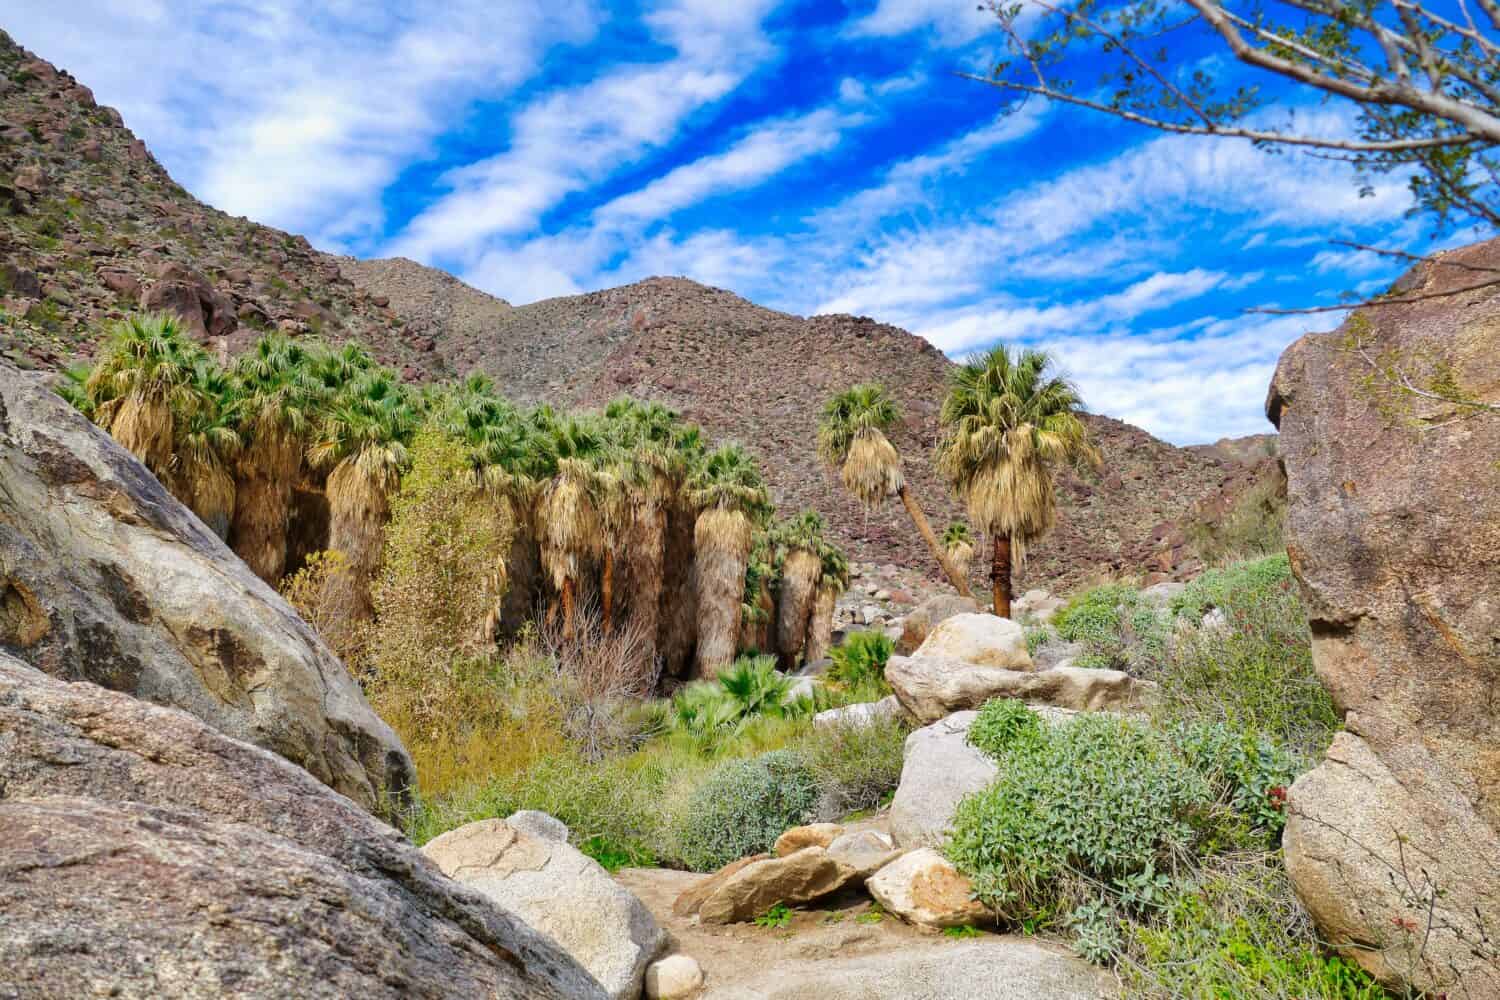 Palm grove with California fan palms in he oasis of Palm Canyon, San Ysidro Mountains, Anza-Borrego Desert State Park, California, USA